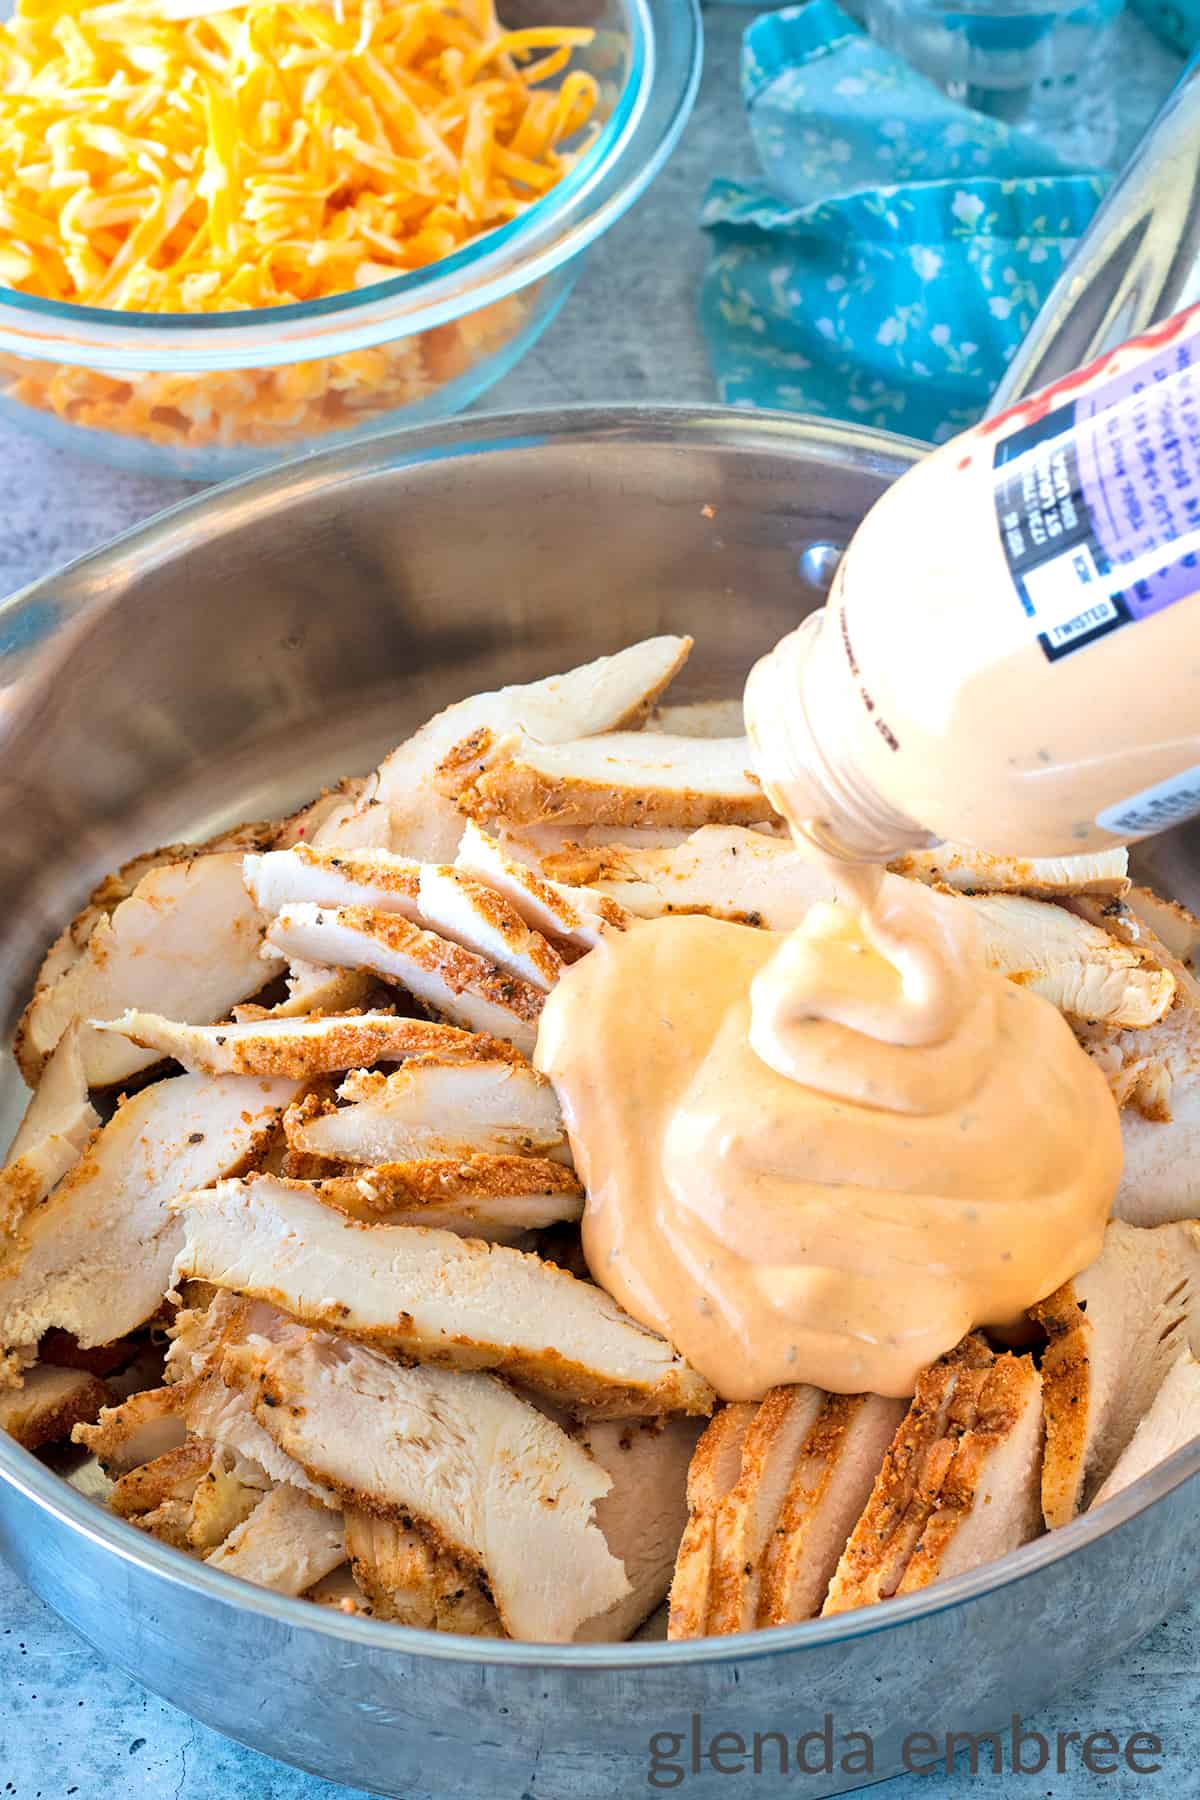 Thinly sliced pre-cooked chicken breast in a stainless steel skillet with buffalo ranch sauce being added.